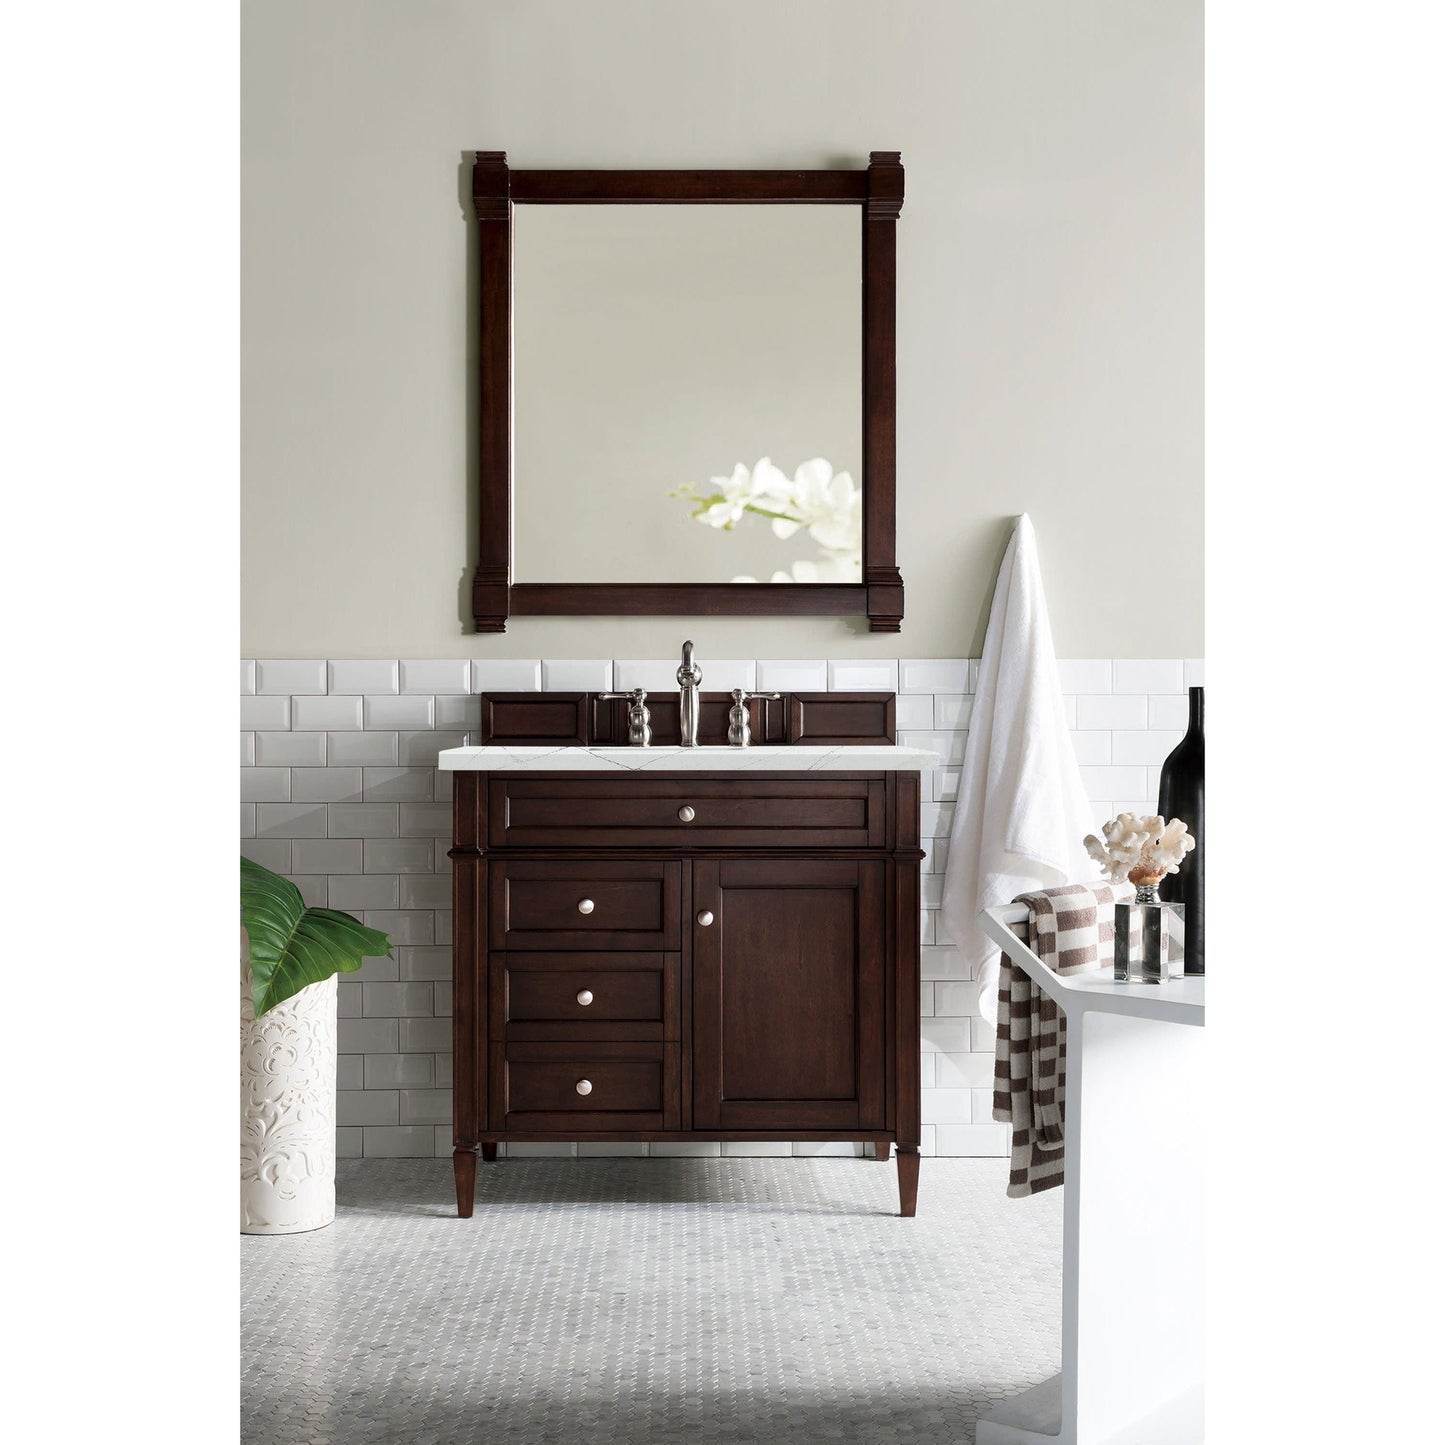 James Martin Vanities Brittany 36" Burnished Mahogany Single Vanity With 3cm Ethereal Noctis Quartz Top